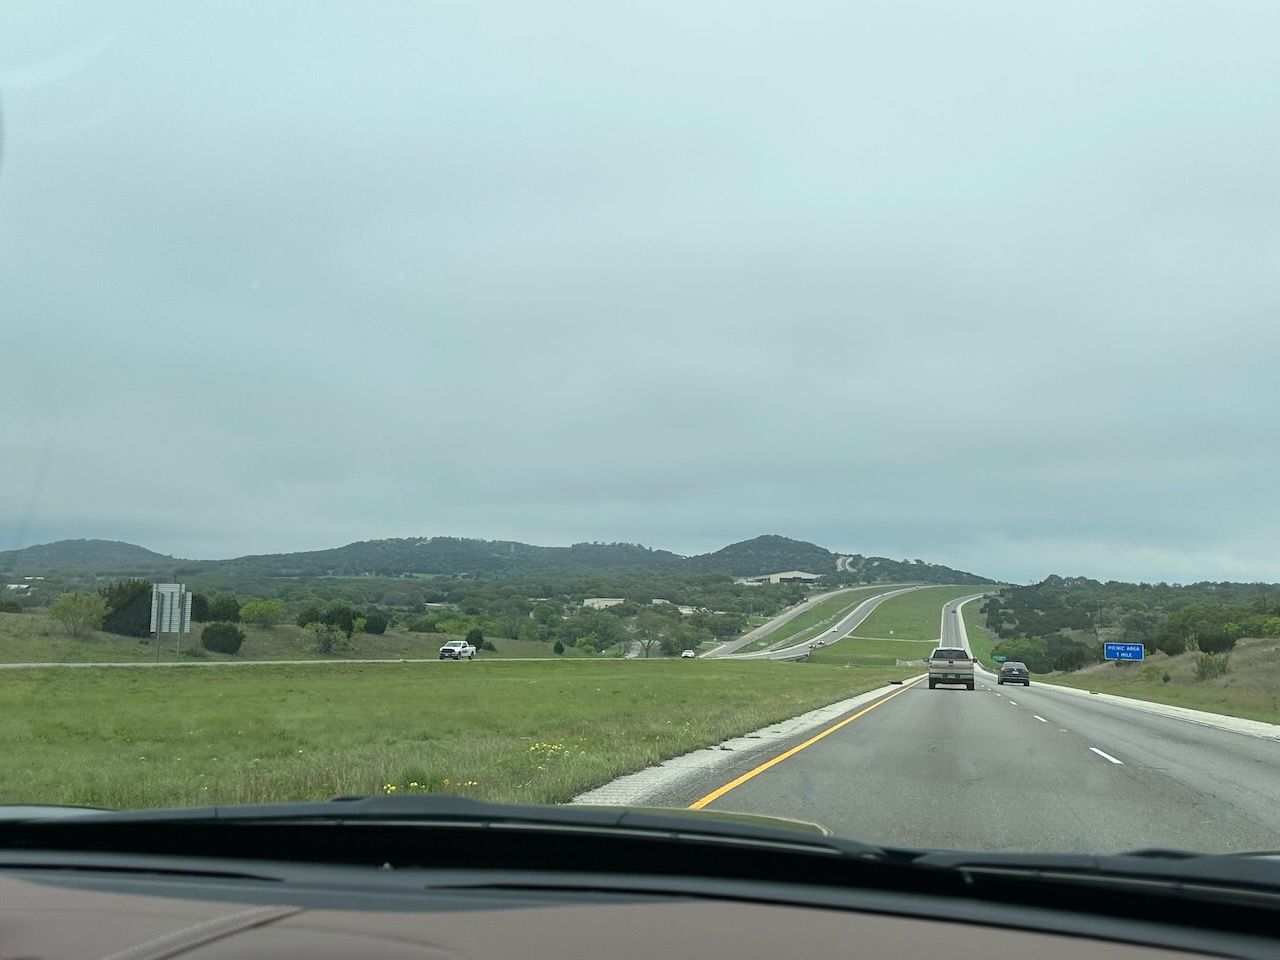 The wide layout of I-10 stretches down a hill and up the next, curving to the right at the top of the hill.